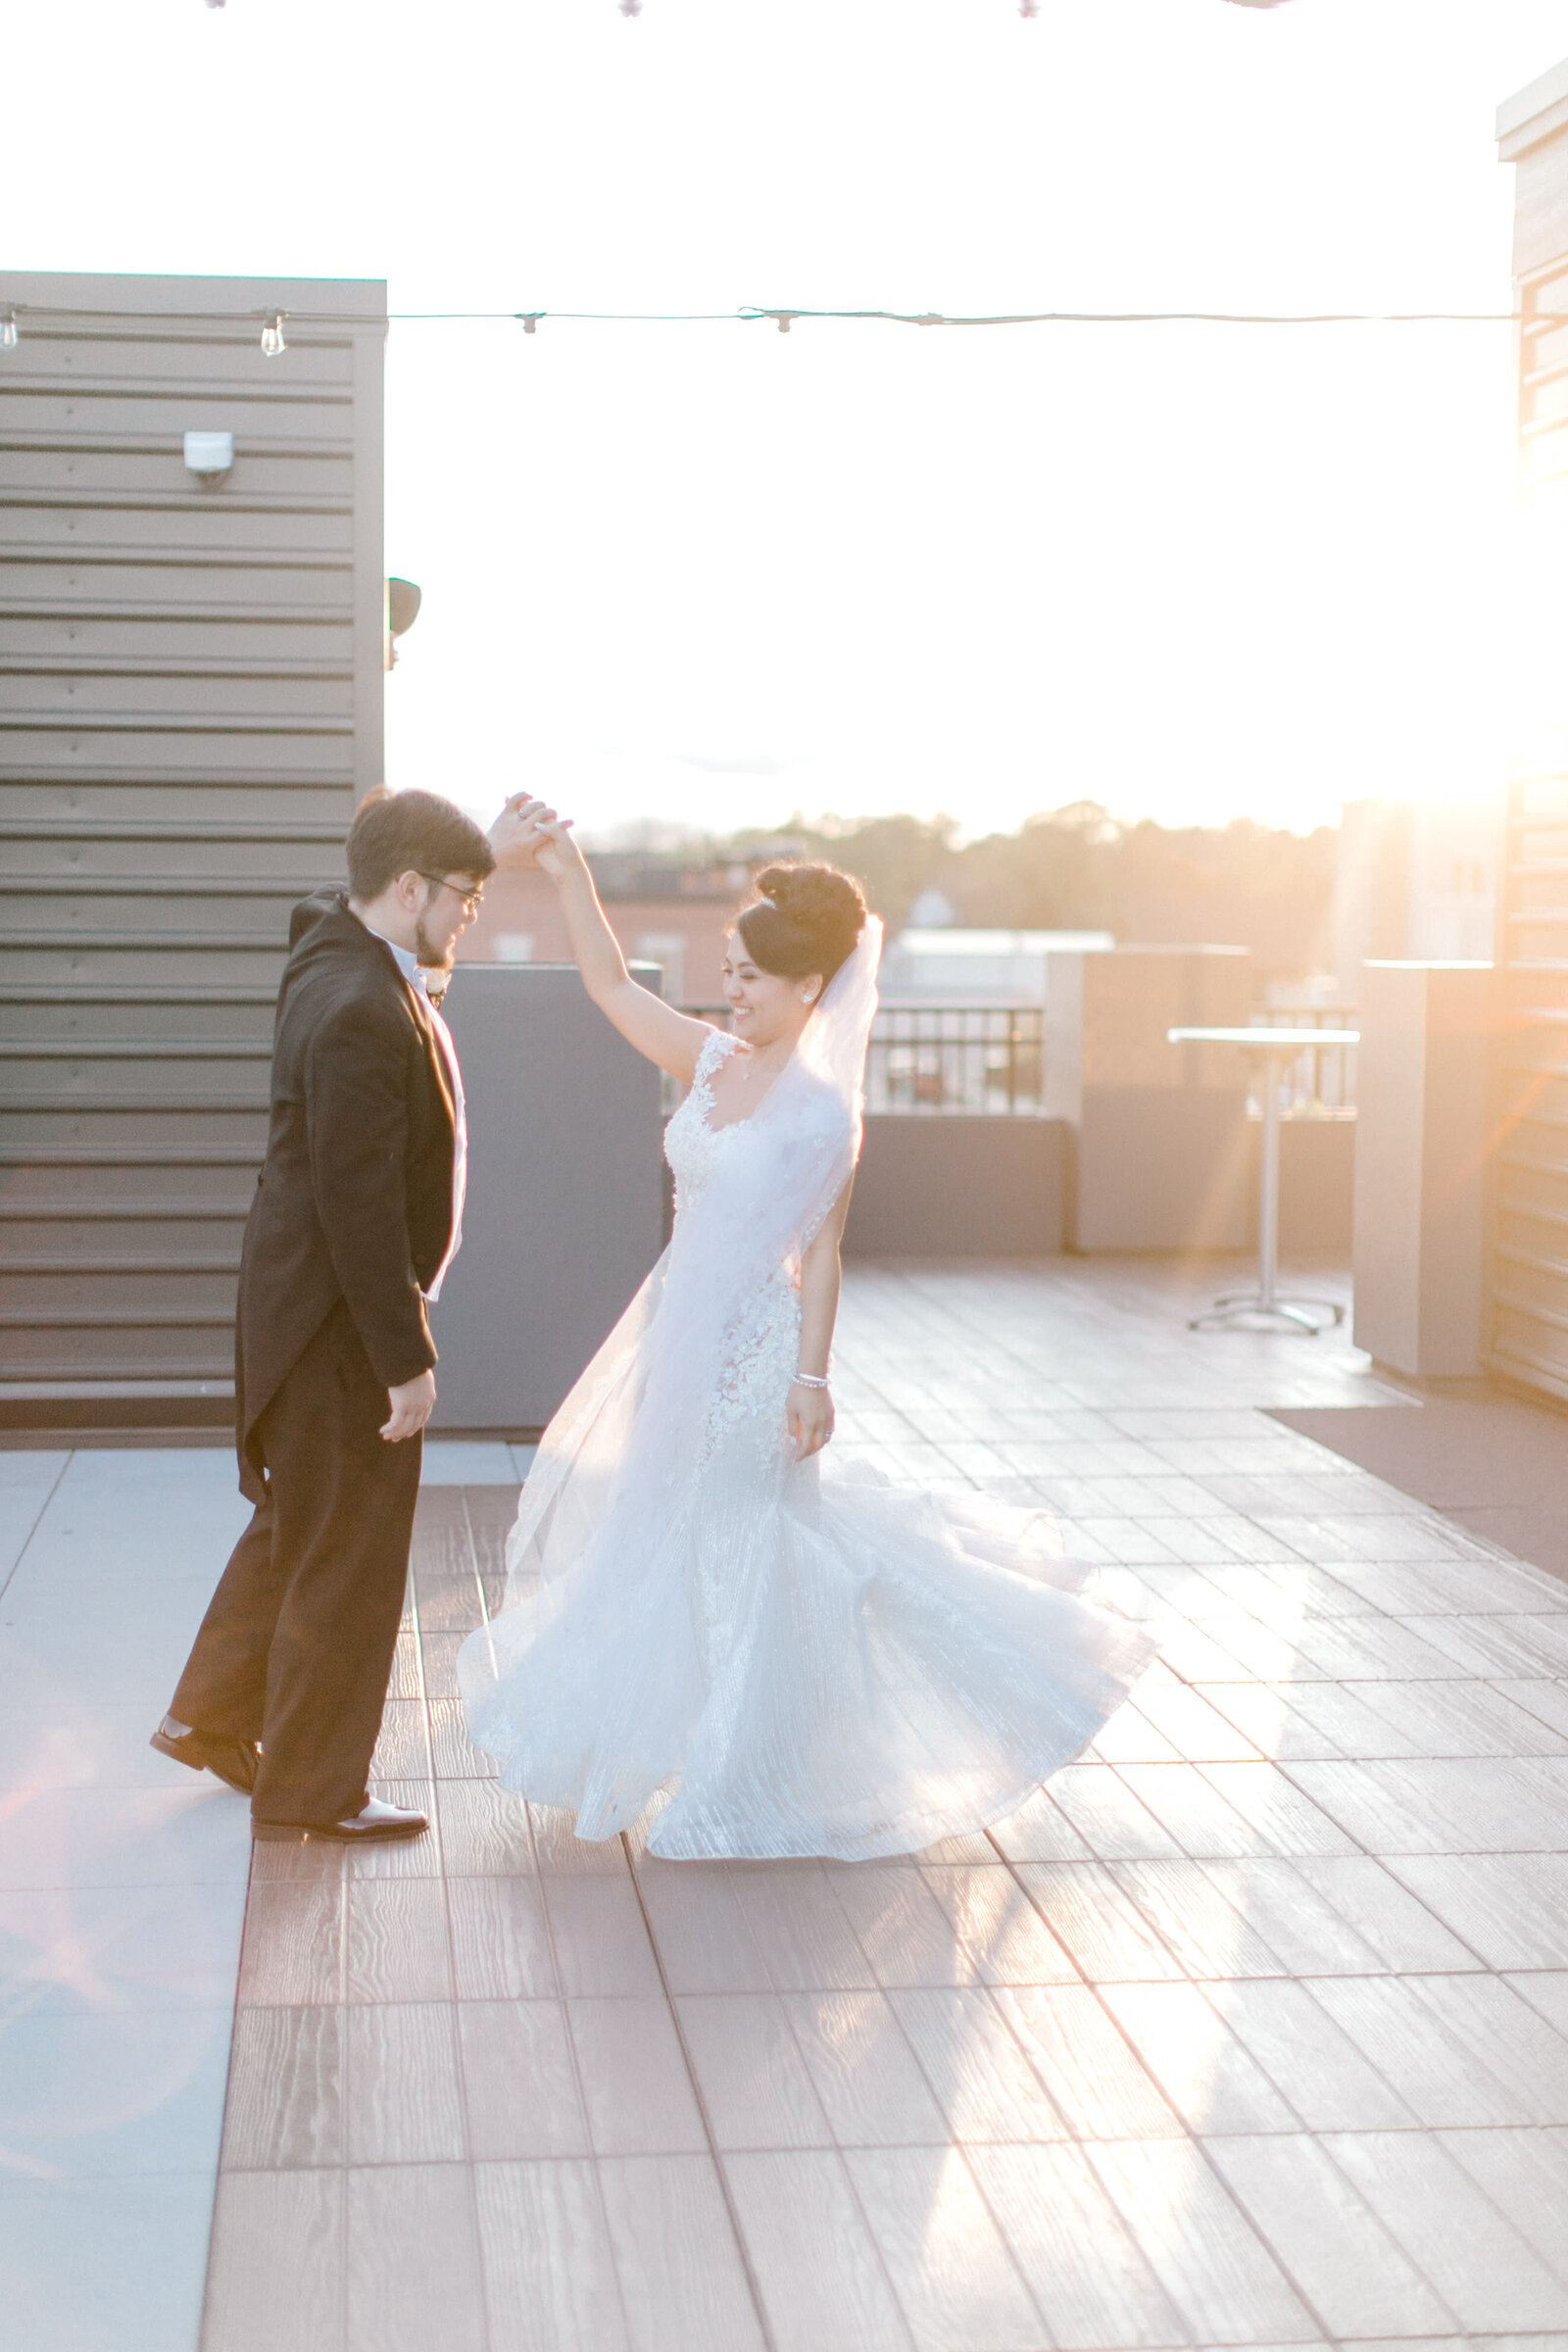 Husband and bride dancing at sunset on rooftop